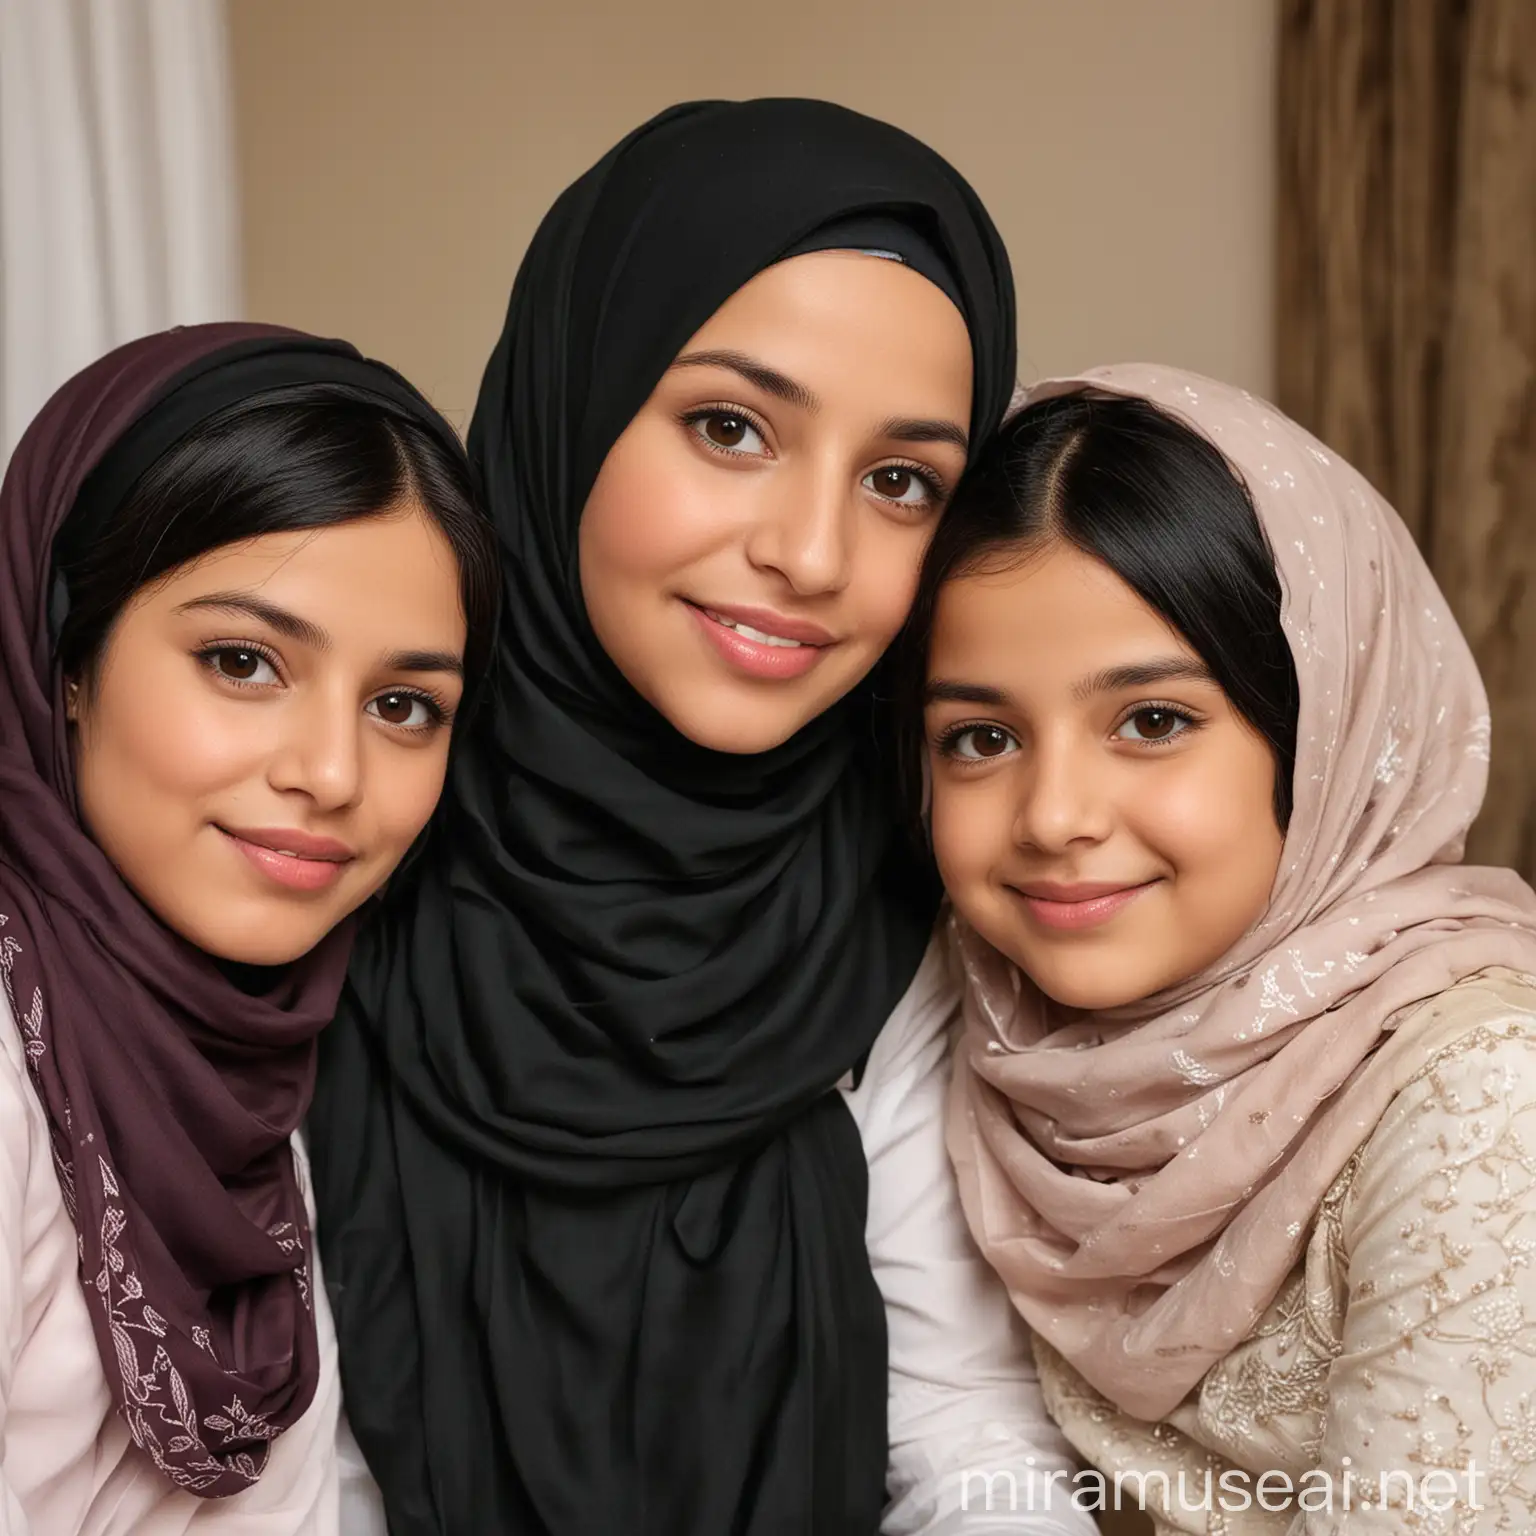 A forty-year-old woman wearing a hijab surrounded by her two daughters, the eldest daughter is twenty years old and the youngest daughter is fourteen years old with black hair, in a beautiful family atmosphere.